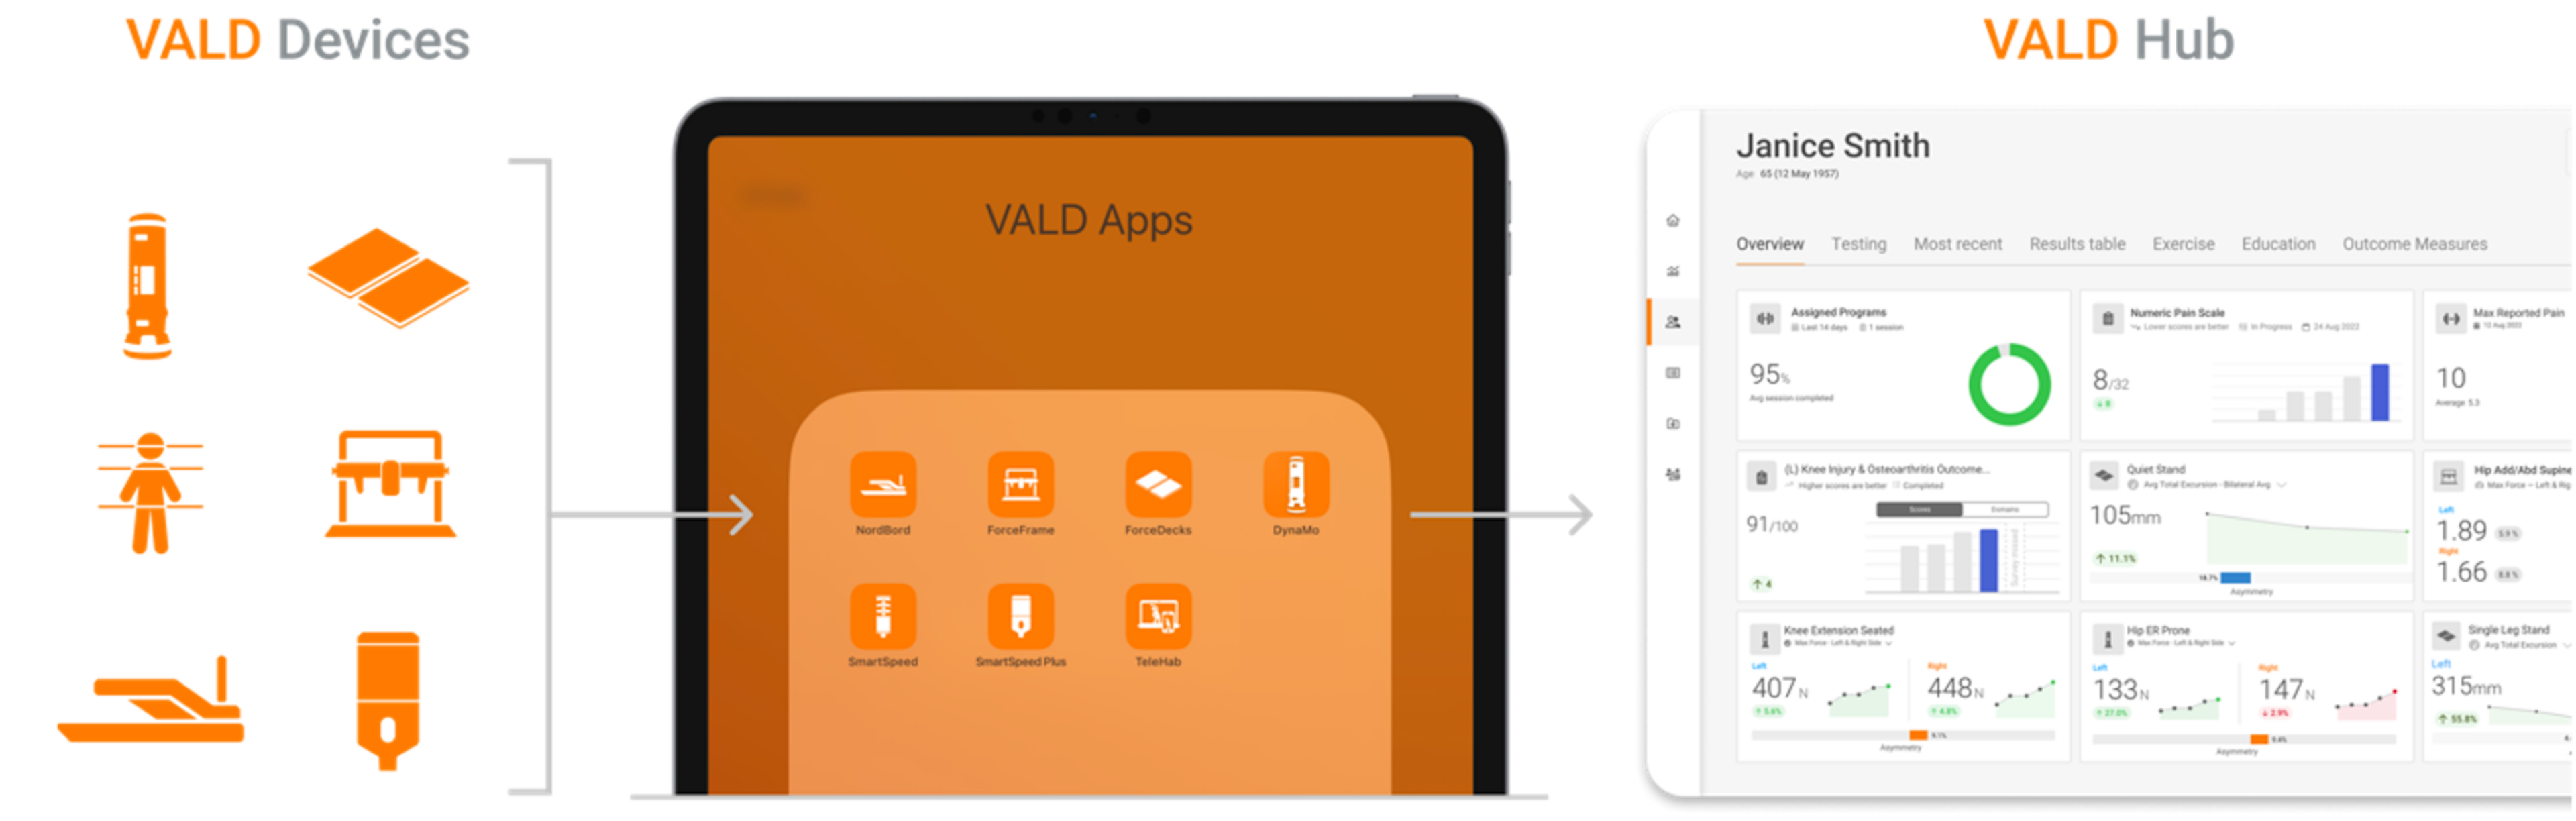 VALD’s devices and apps are the conduits that deliver all of your musculoskeletal data to one place: VALD Hub.